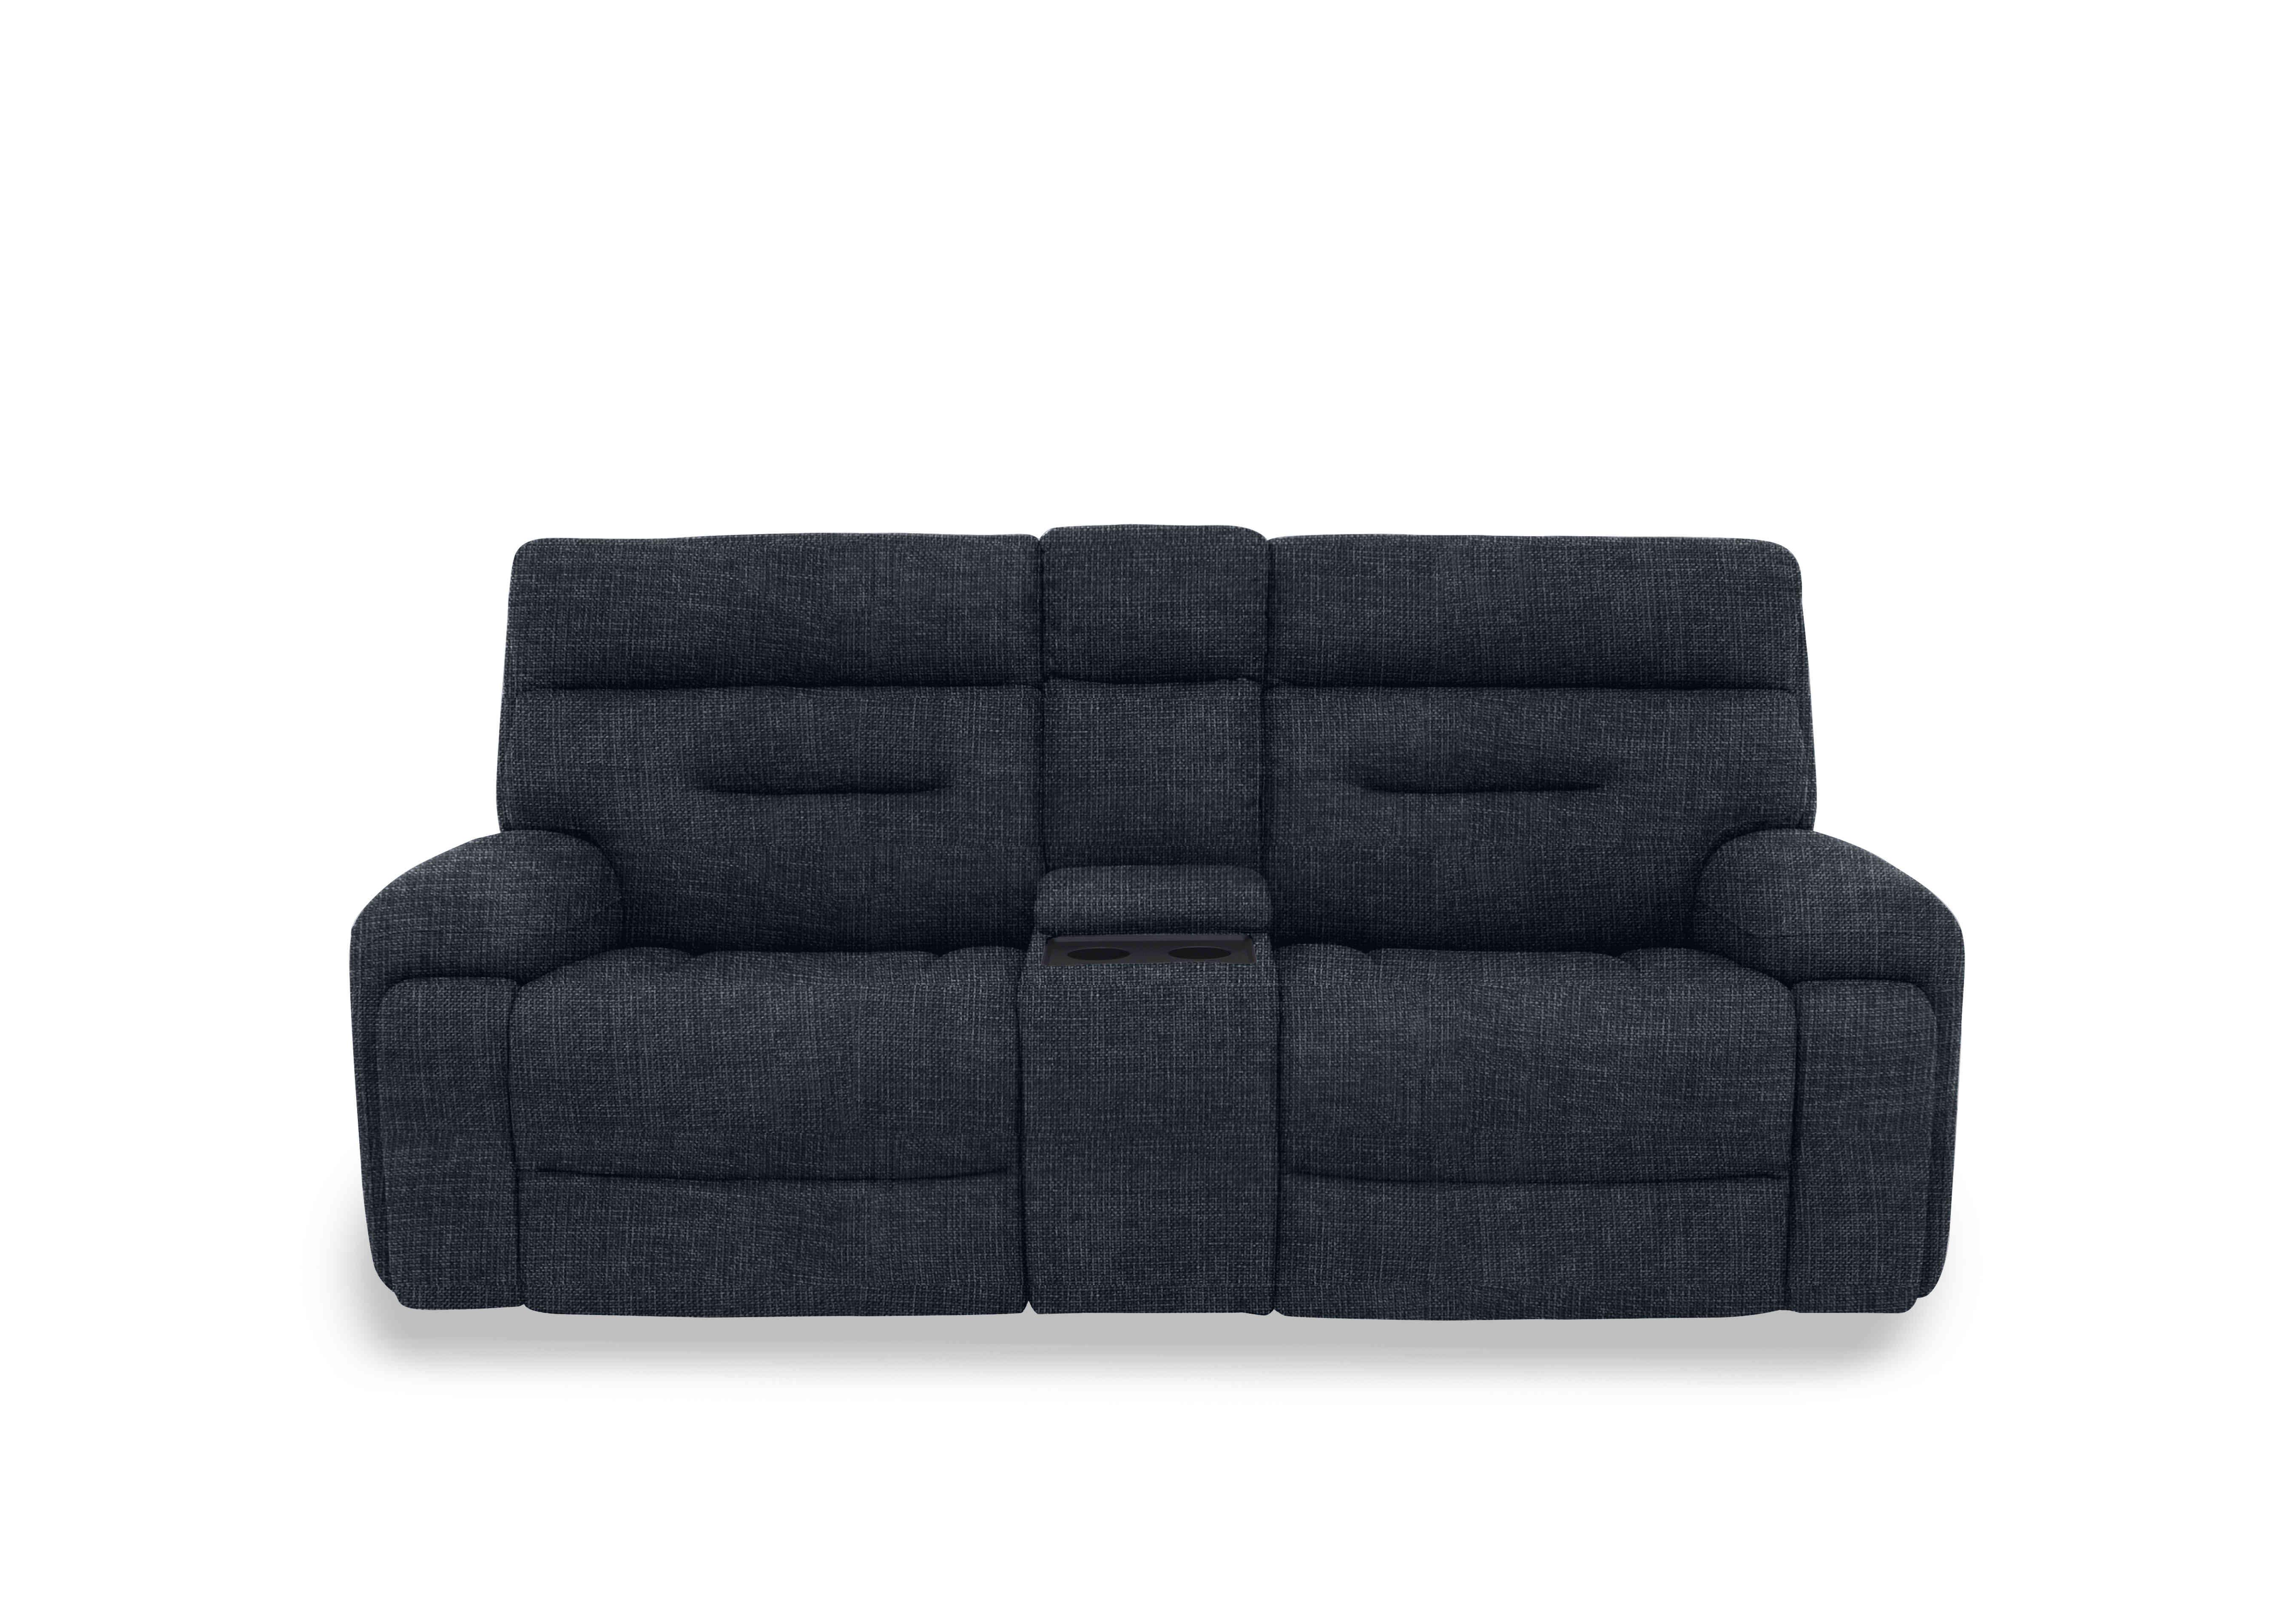 Cinemax Media 3 Seater Fabric Power Recliner Sofa with Power Headrests in Hf-0102 Halifax Black Mica on Furniture Village